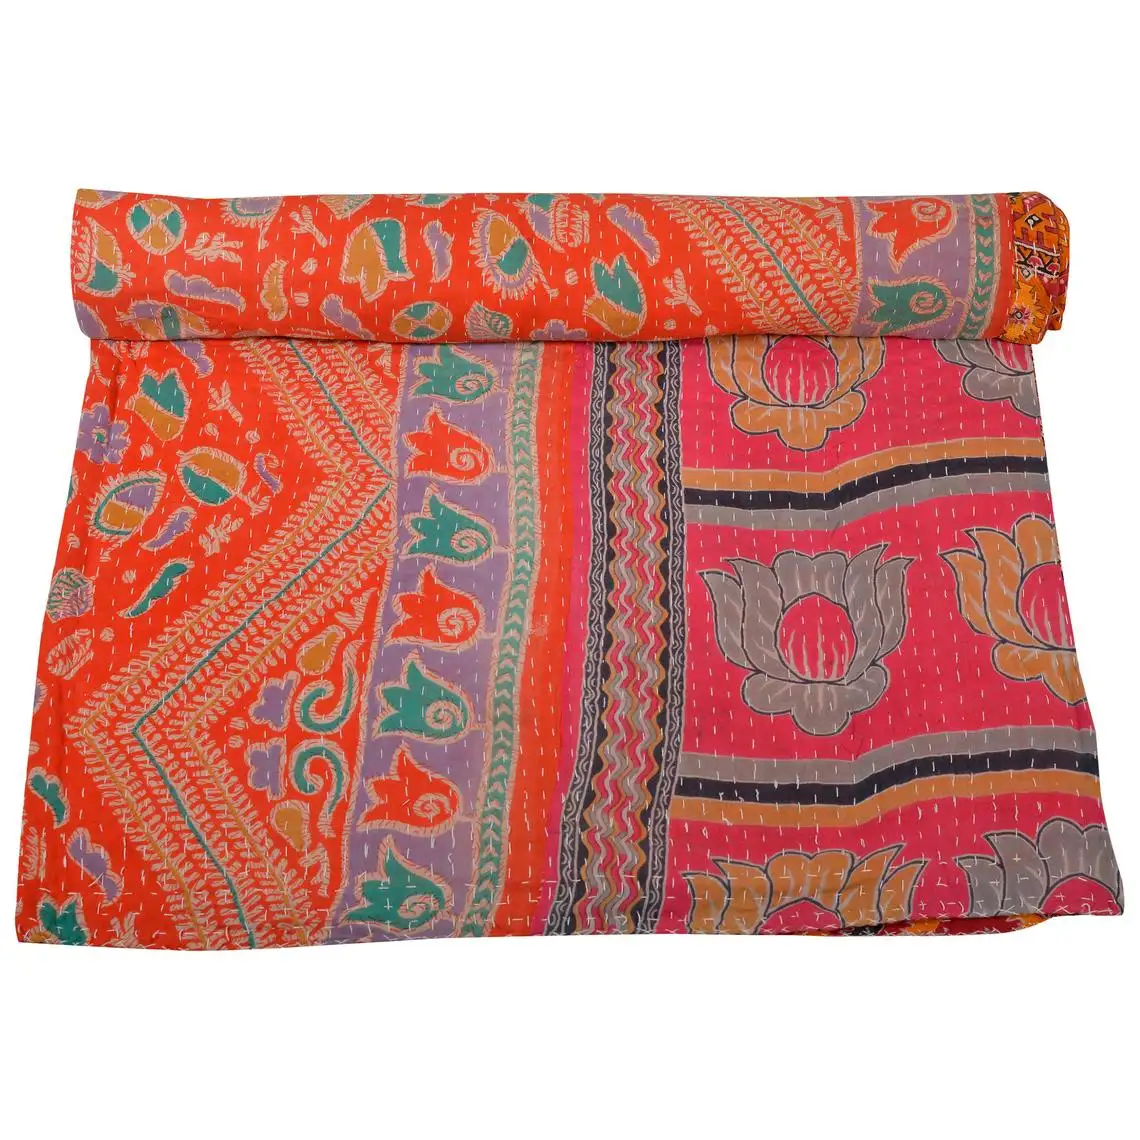 Wholesale rare hand stitched indian kantha quilt vintage handmade reversible bedspread best quality throw